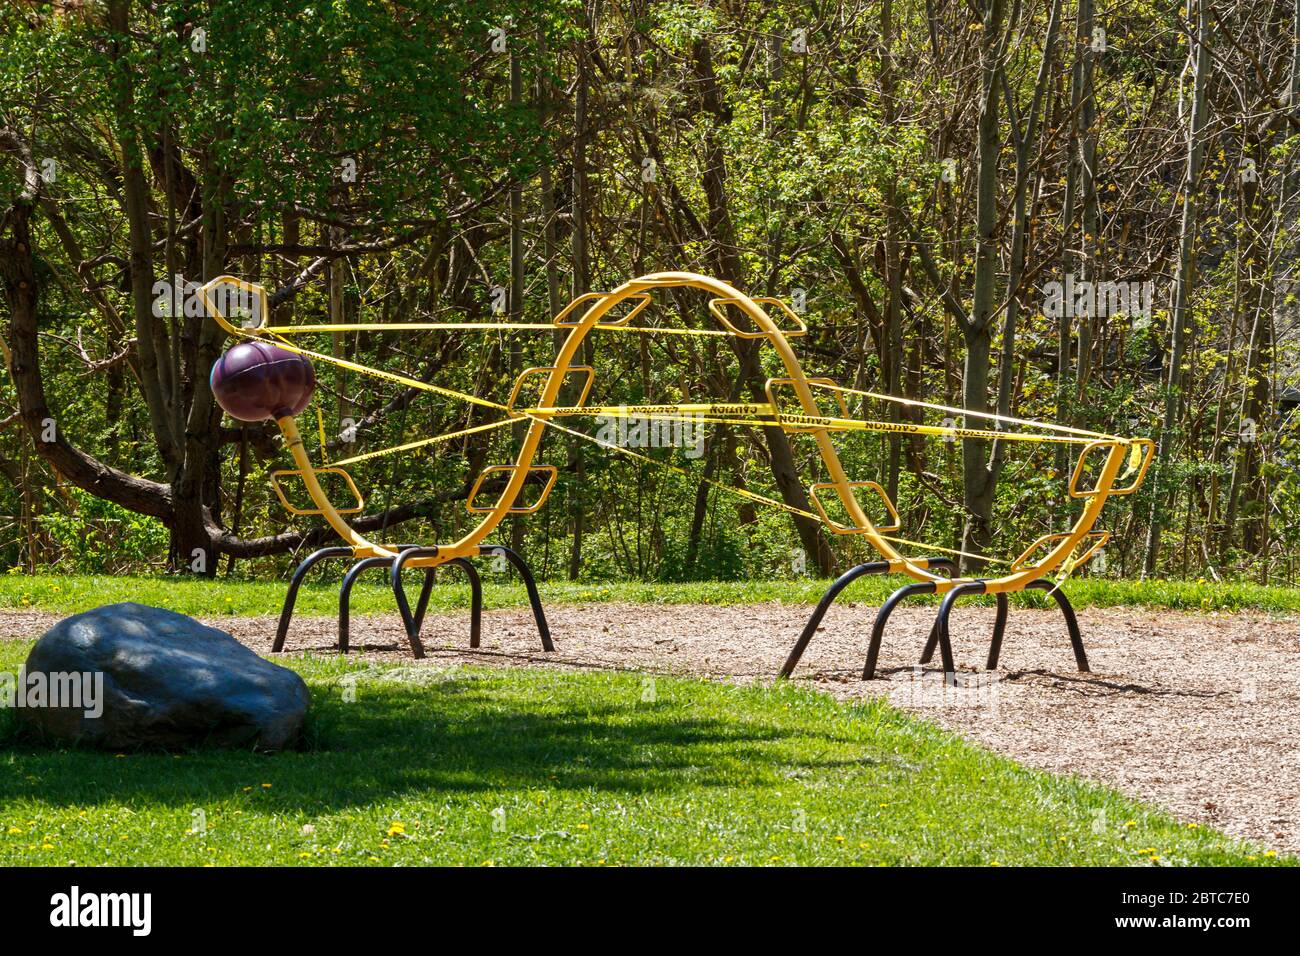 Playground Equipment taped off to prevent close contact Stock Photo